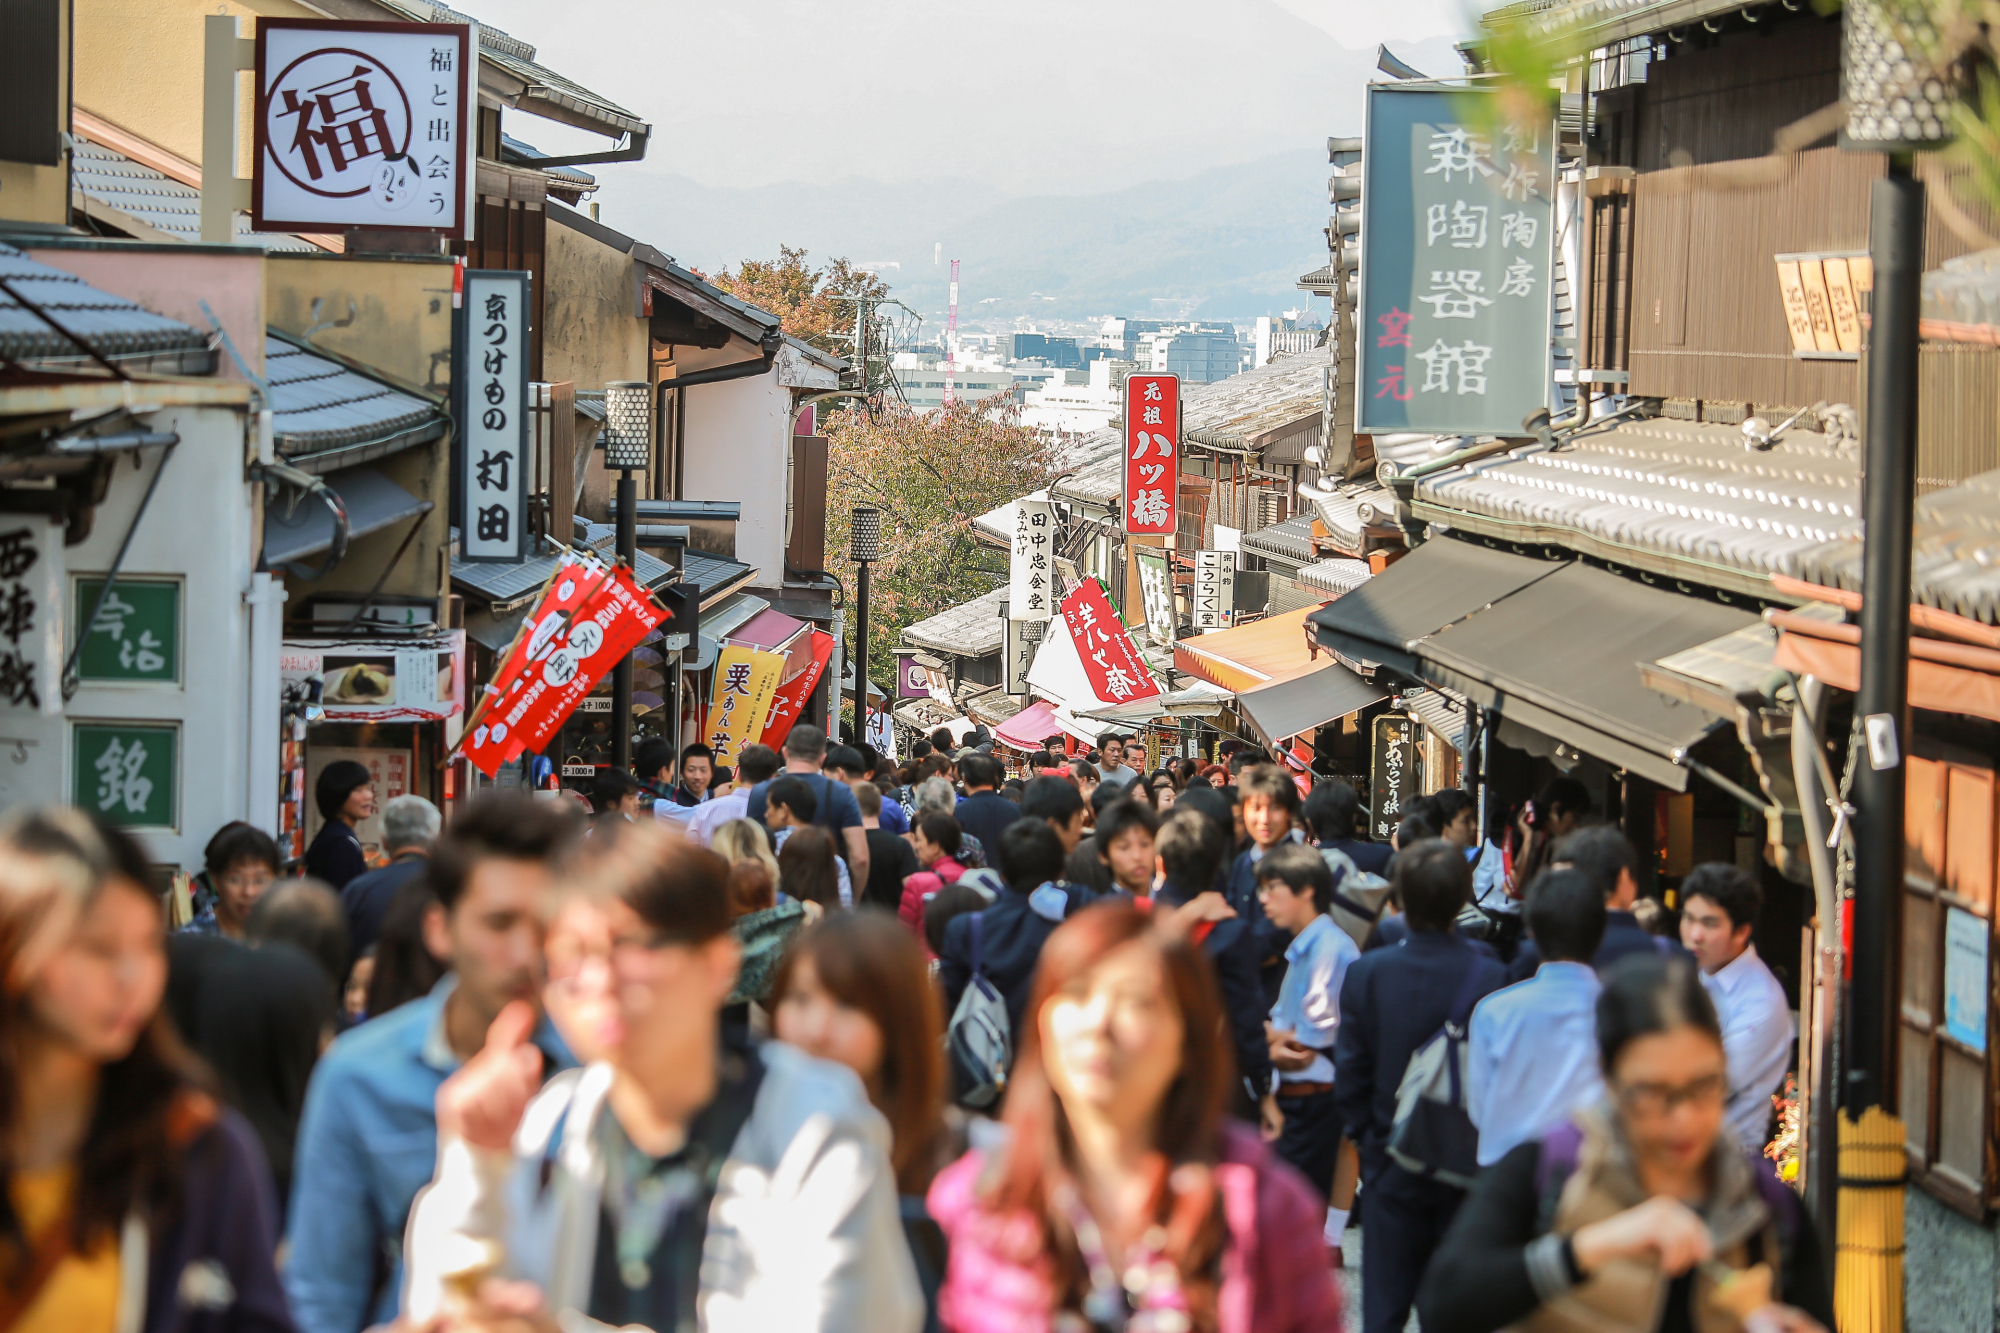 Jumble in the urban jungle: Tourists crowd the street in Kyoto where local residents have become increasingly irked by what some are calling 'overtourism.' | GETTY IMAGES